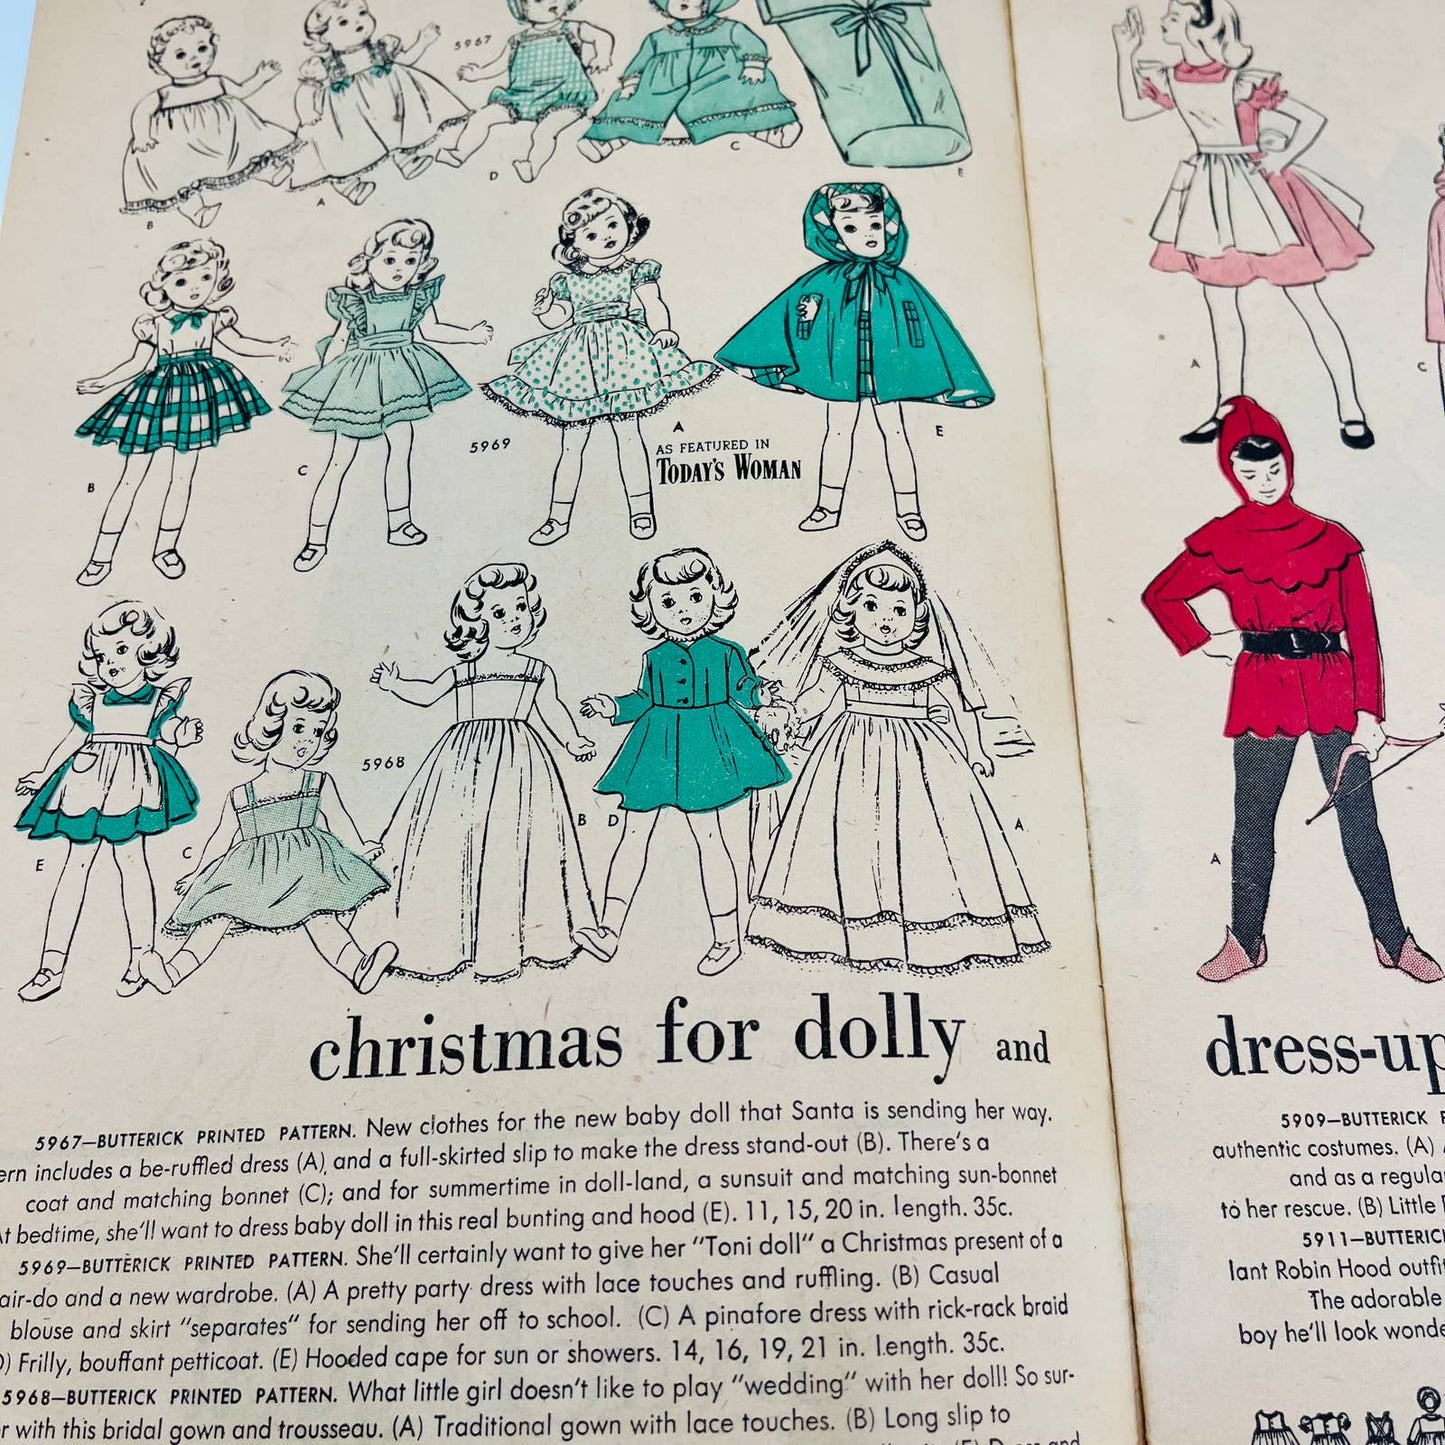 1951 Belk-Leggett Butterick Fashion Preview Christmas Outfit Sewing Patterns C8